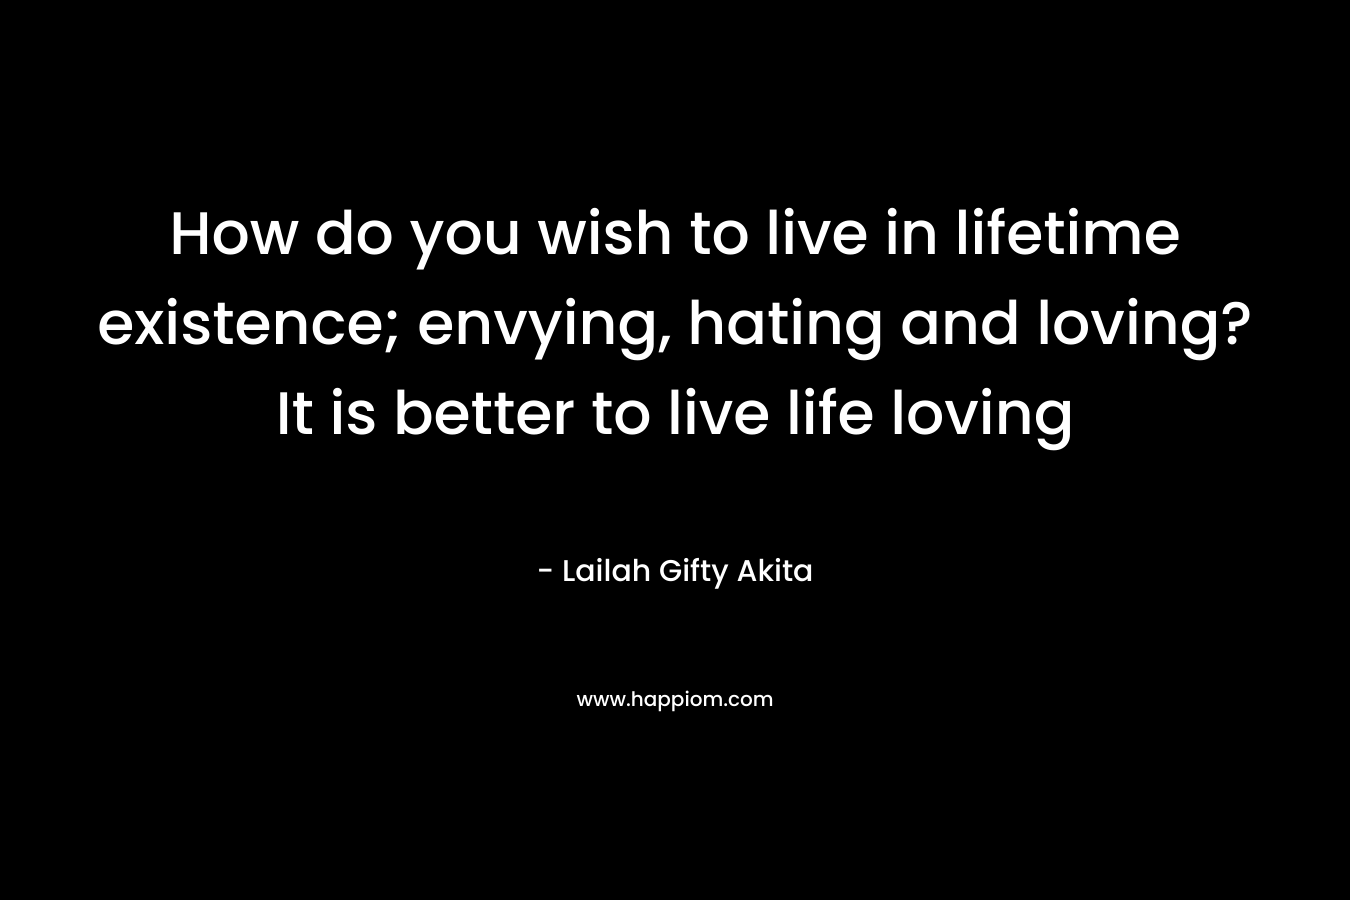 How do you wish to live in lifetime existence; envying, hating and loving? It is better to live life loving – Lailah Gifty Akita